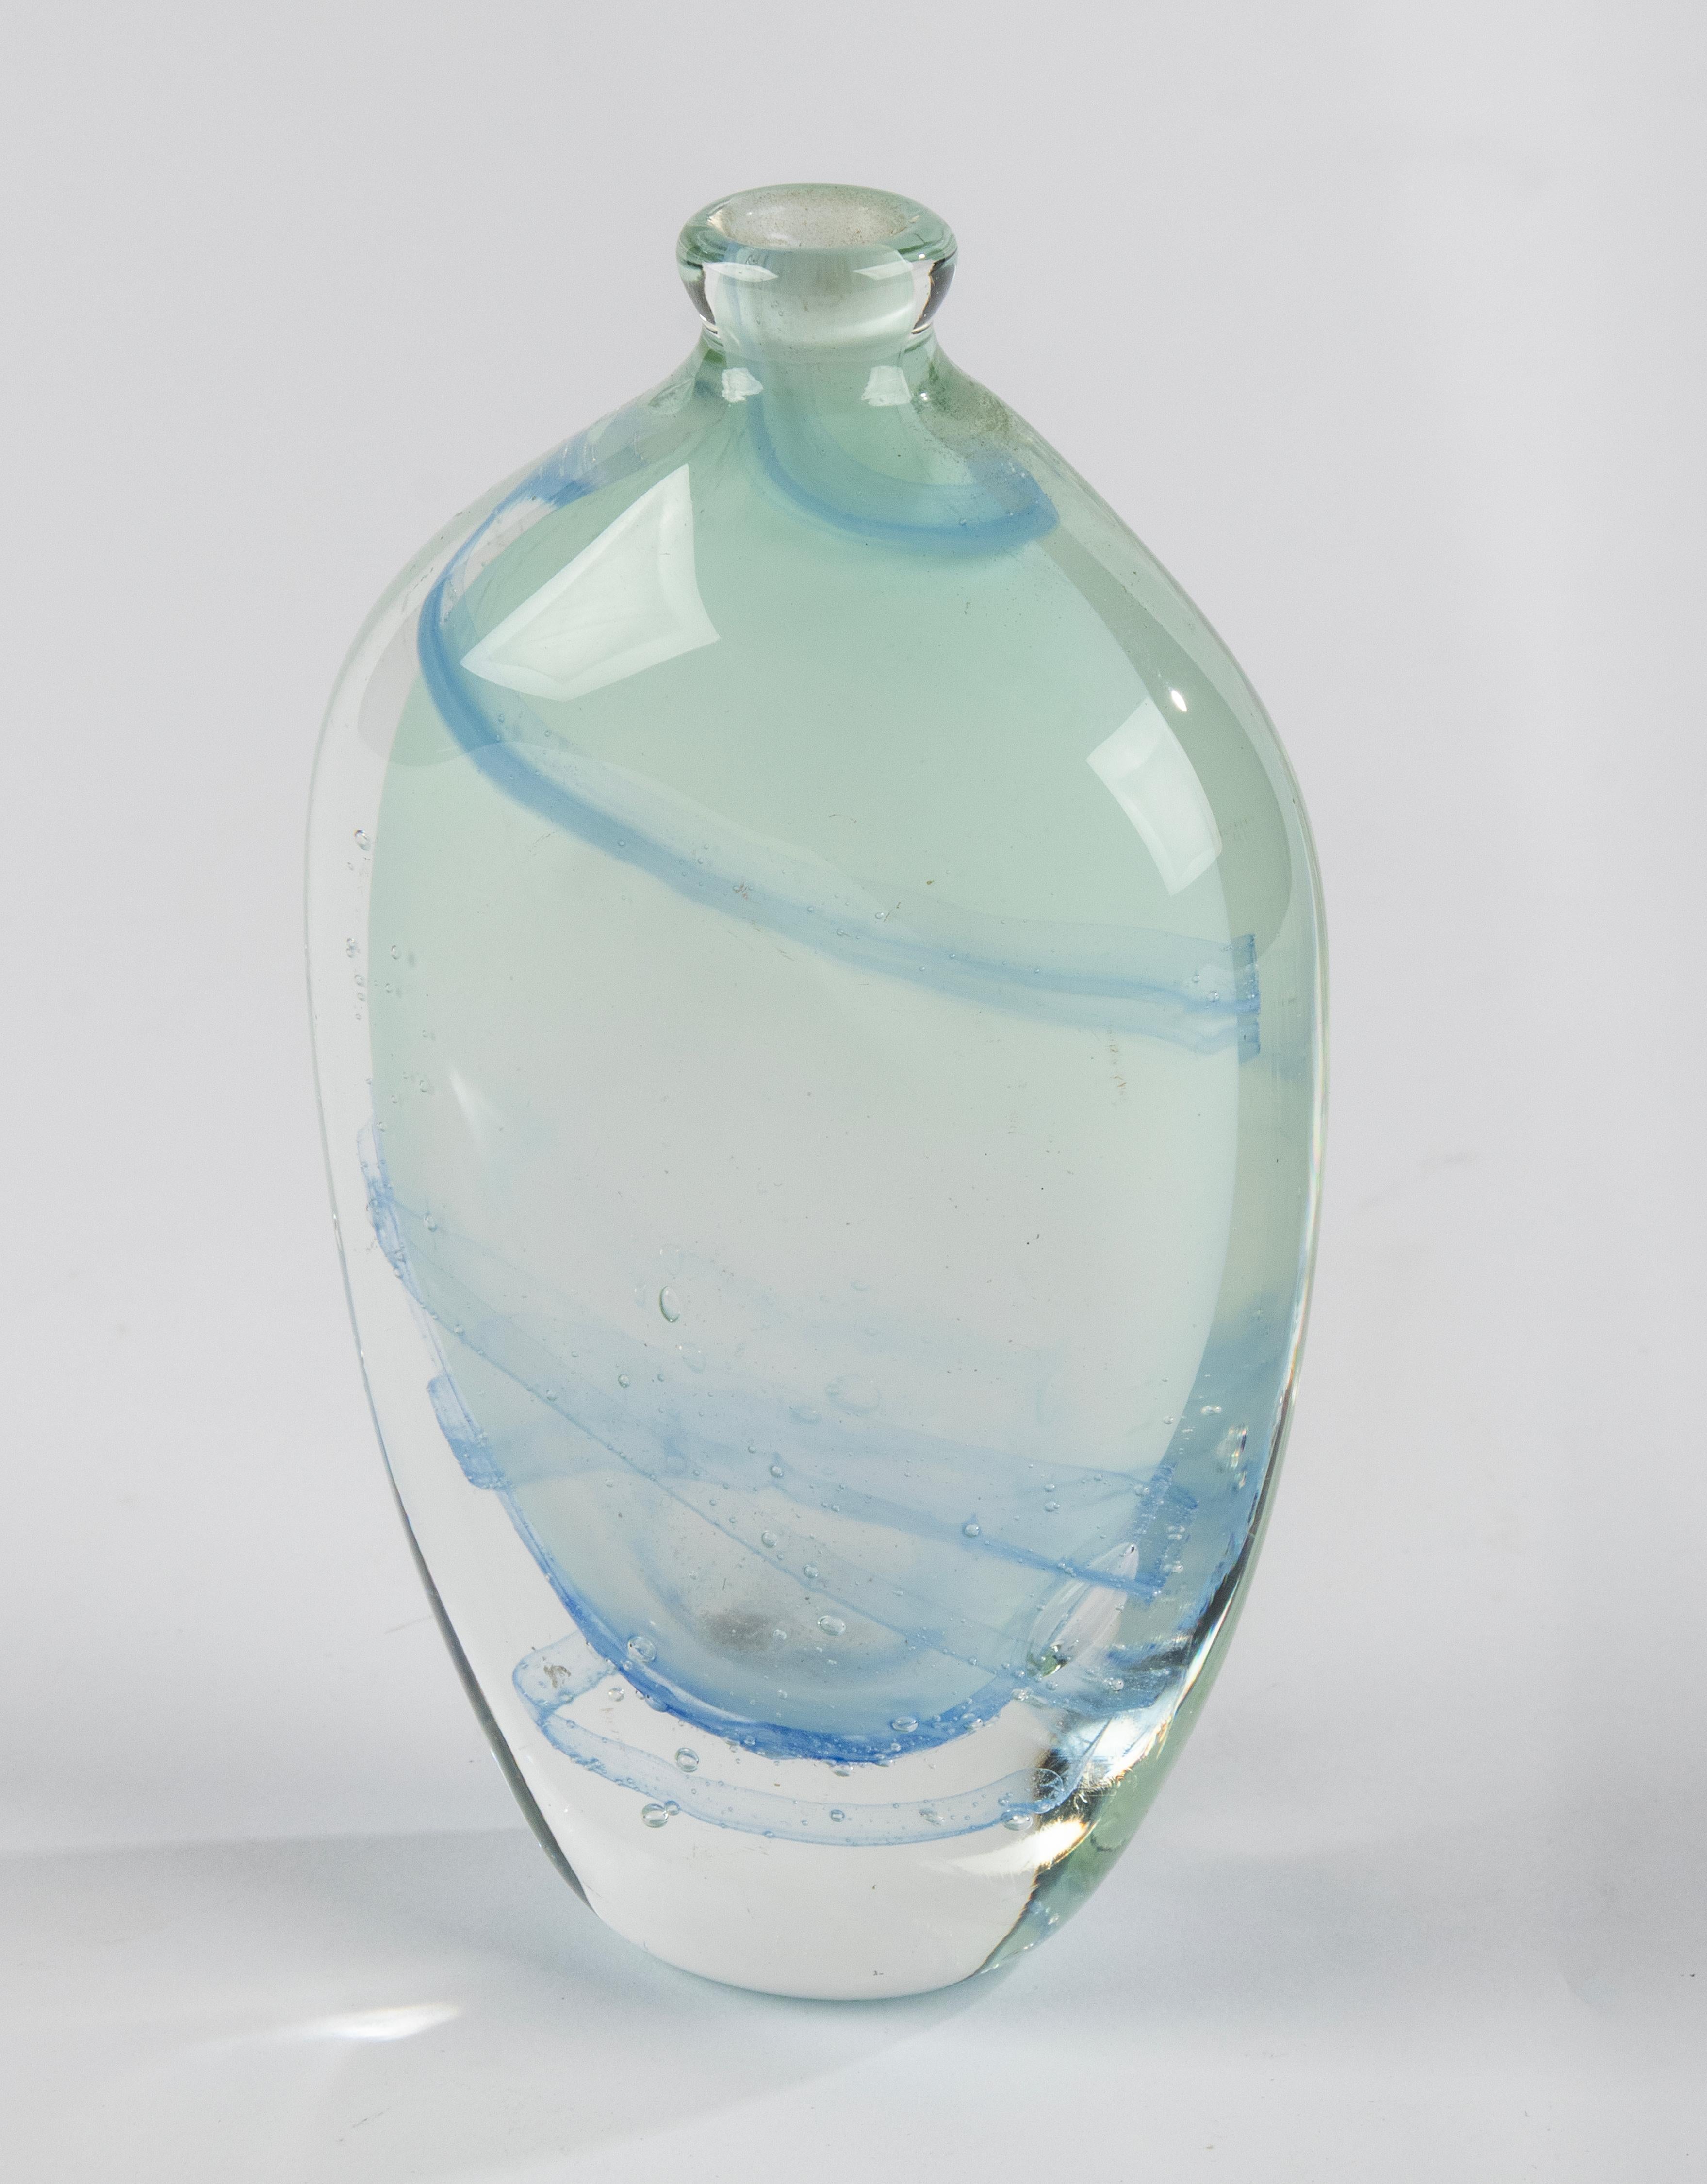 Small Art Glass Vase - Seguso - Soliflore  In Good Condition For Sale In Casteren, Noord-Brabant